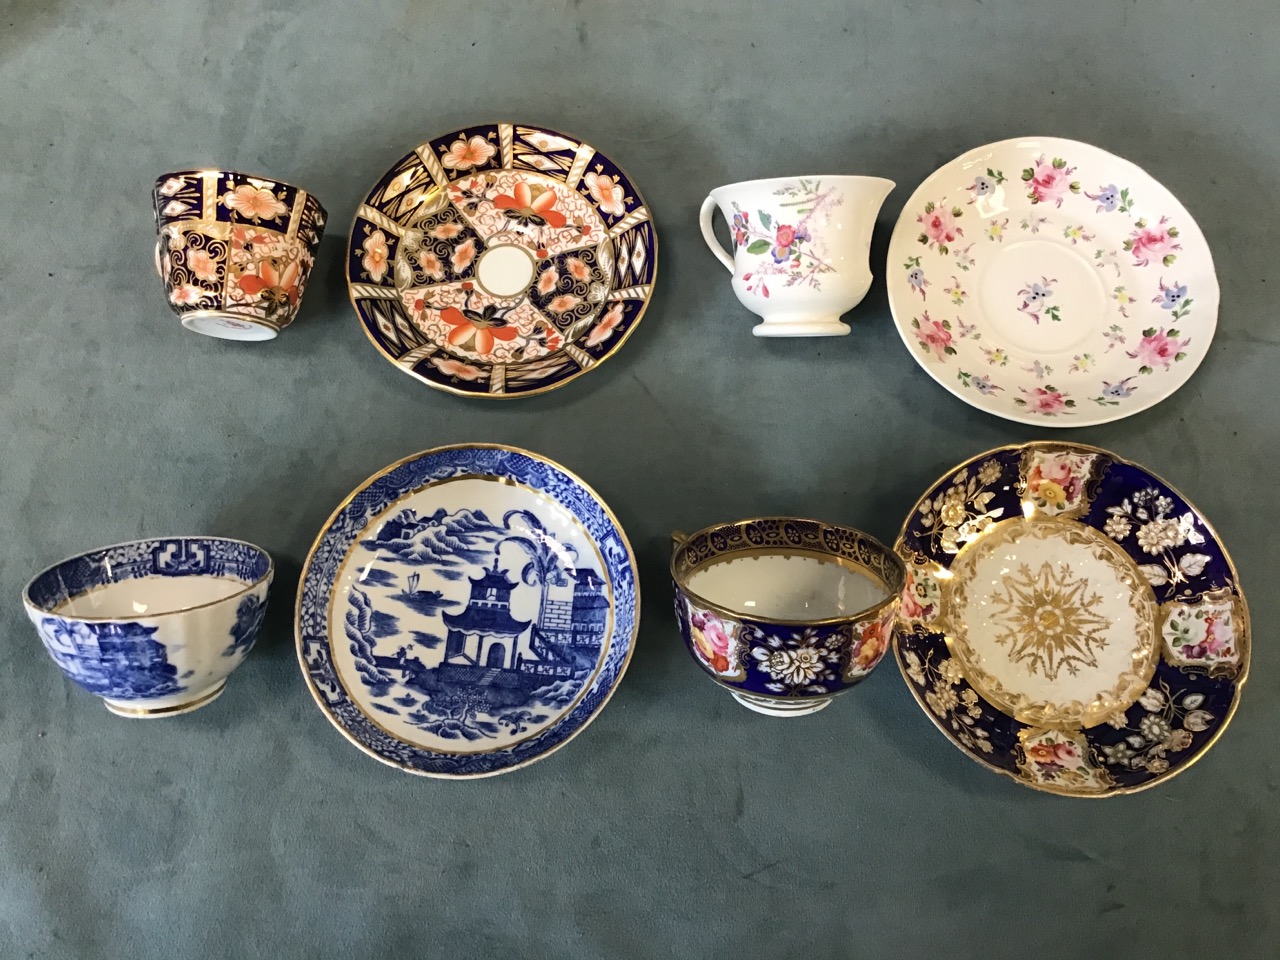 A collection of 18th and 19th century porcelain tea wares - New Hall, Spode Feldspar, Hilditch, - Image 2 of 3